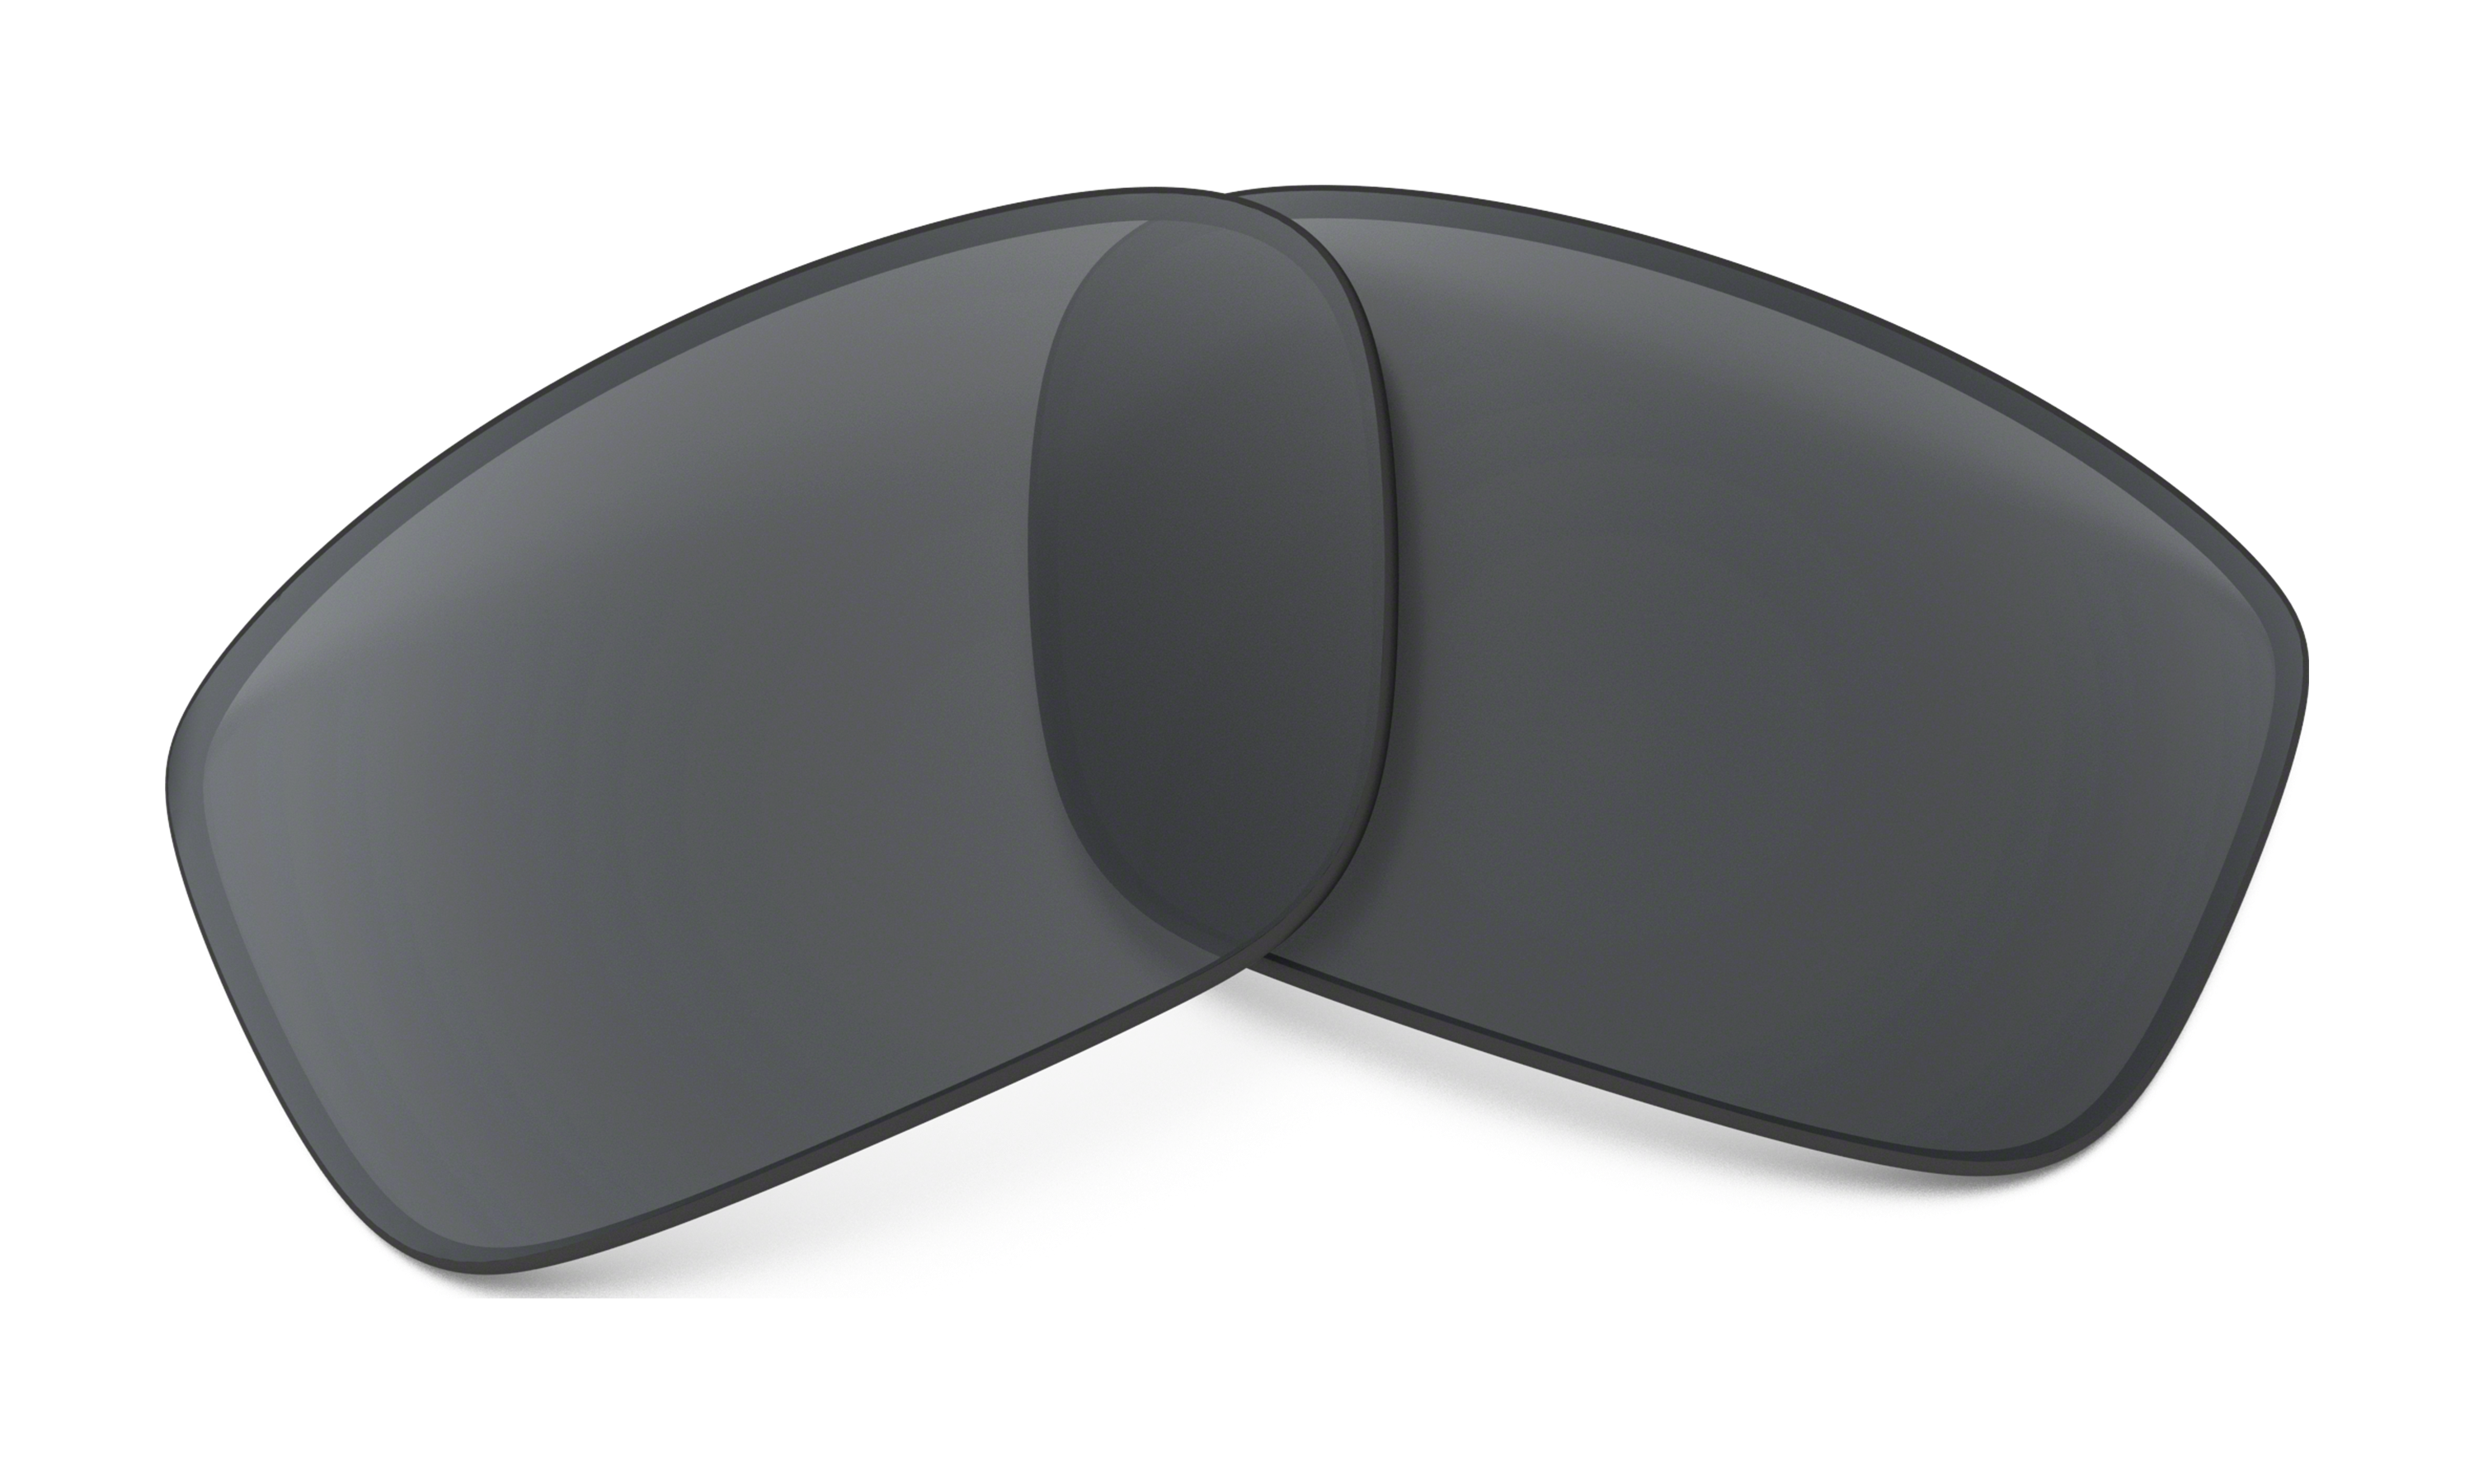 oakley straightlink replacement lenses